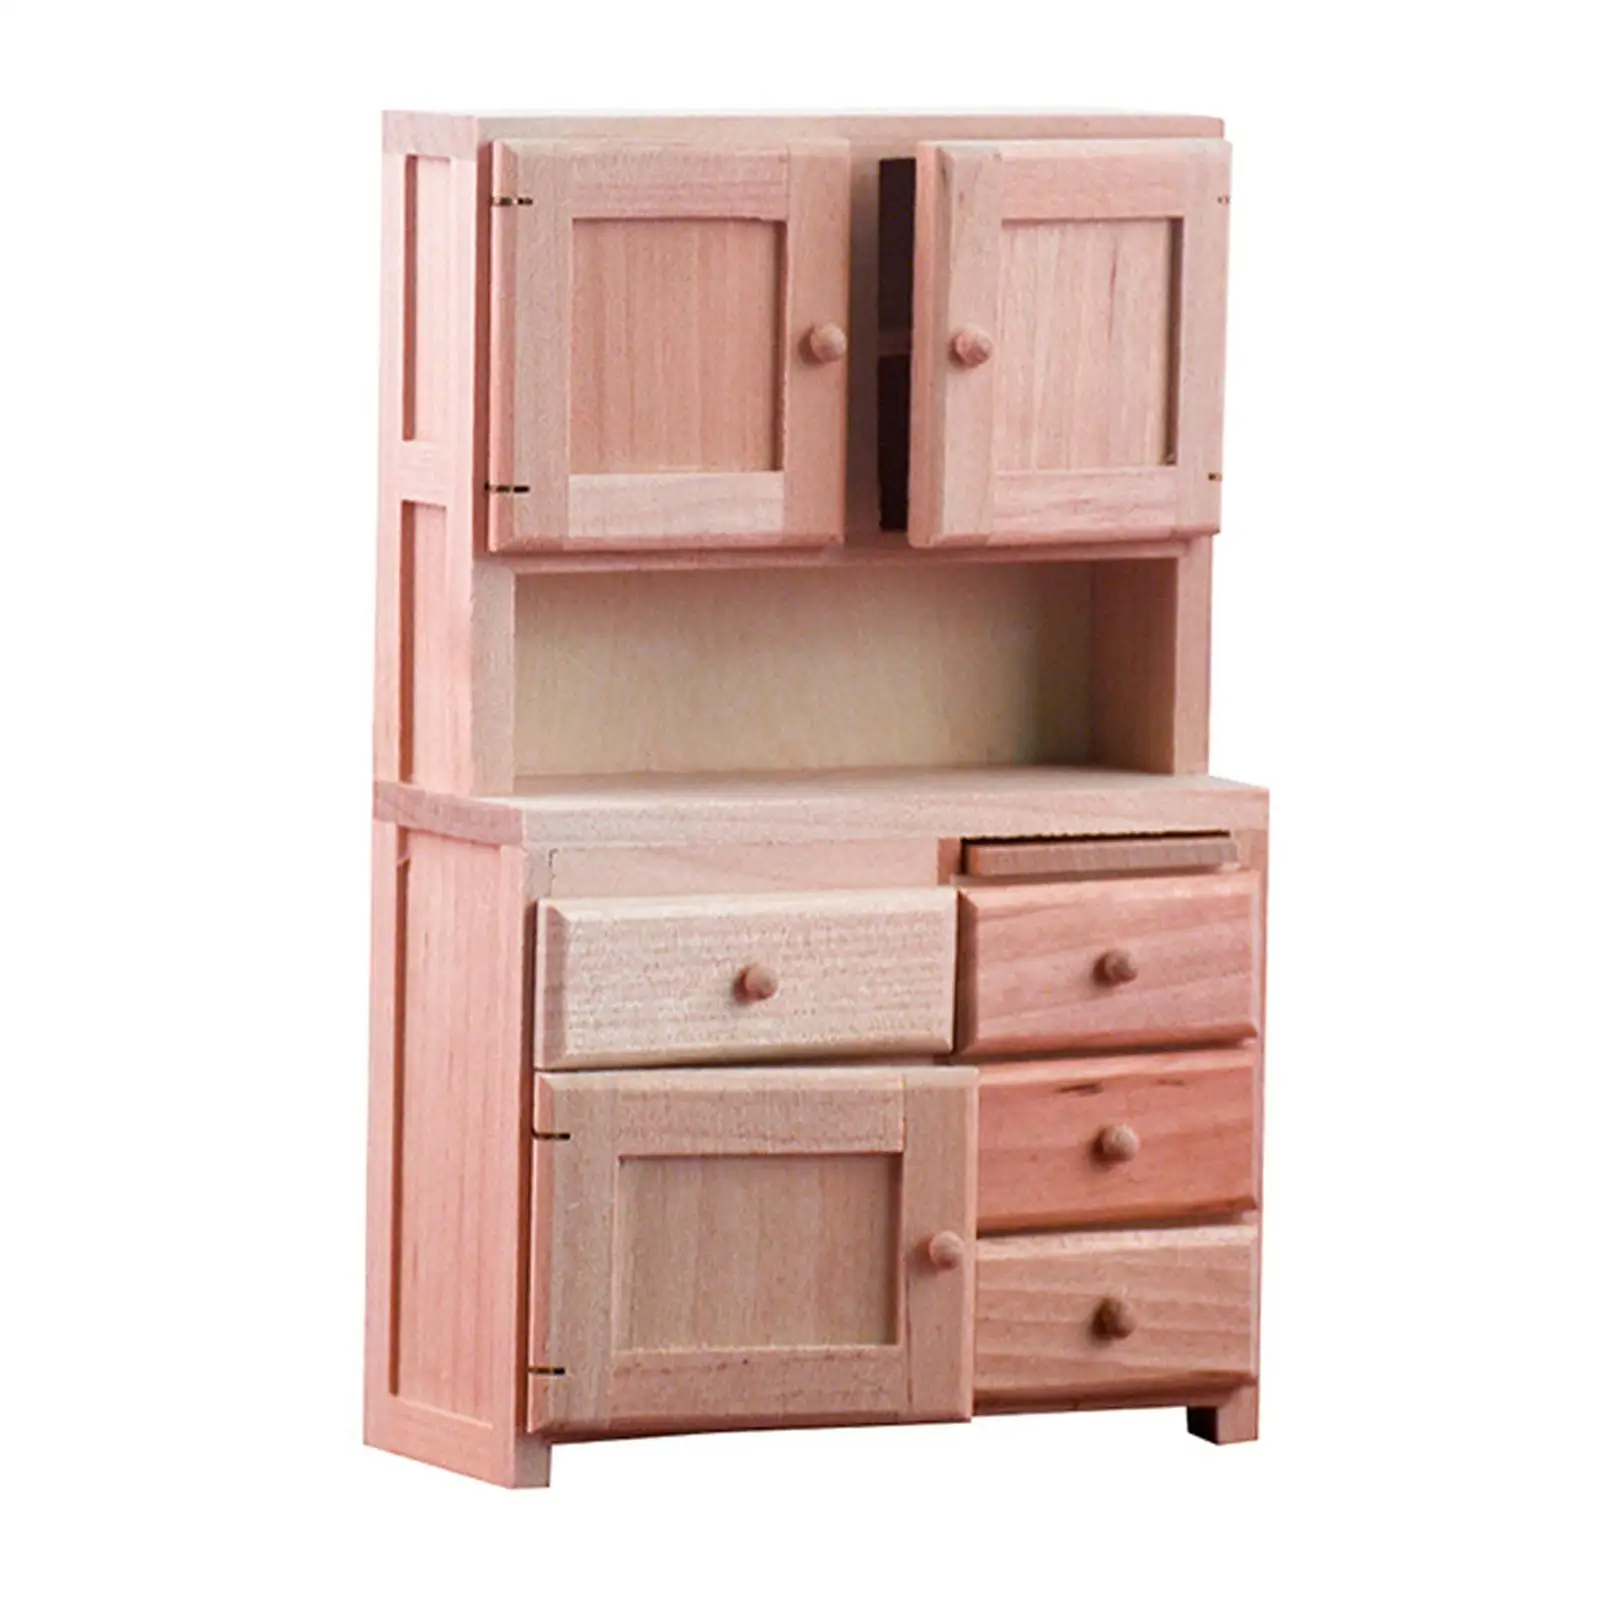 Simulation Unpainted Wooden Cabinet Dollhouse Scenery 1:12 Ornaments